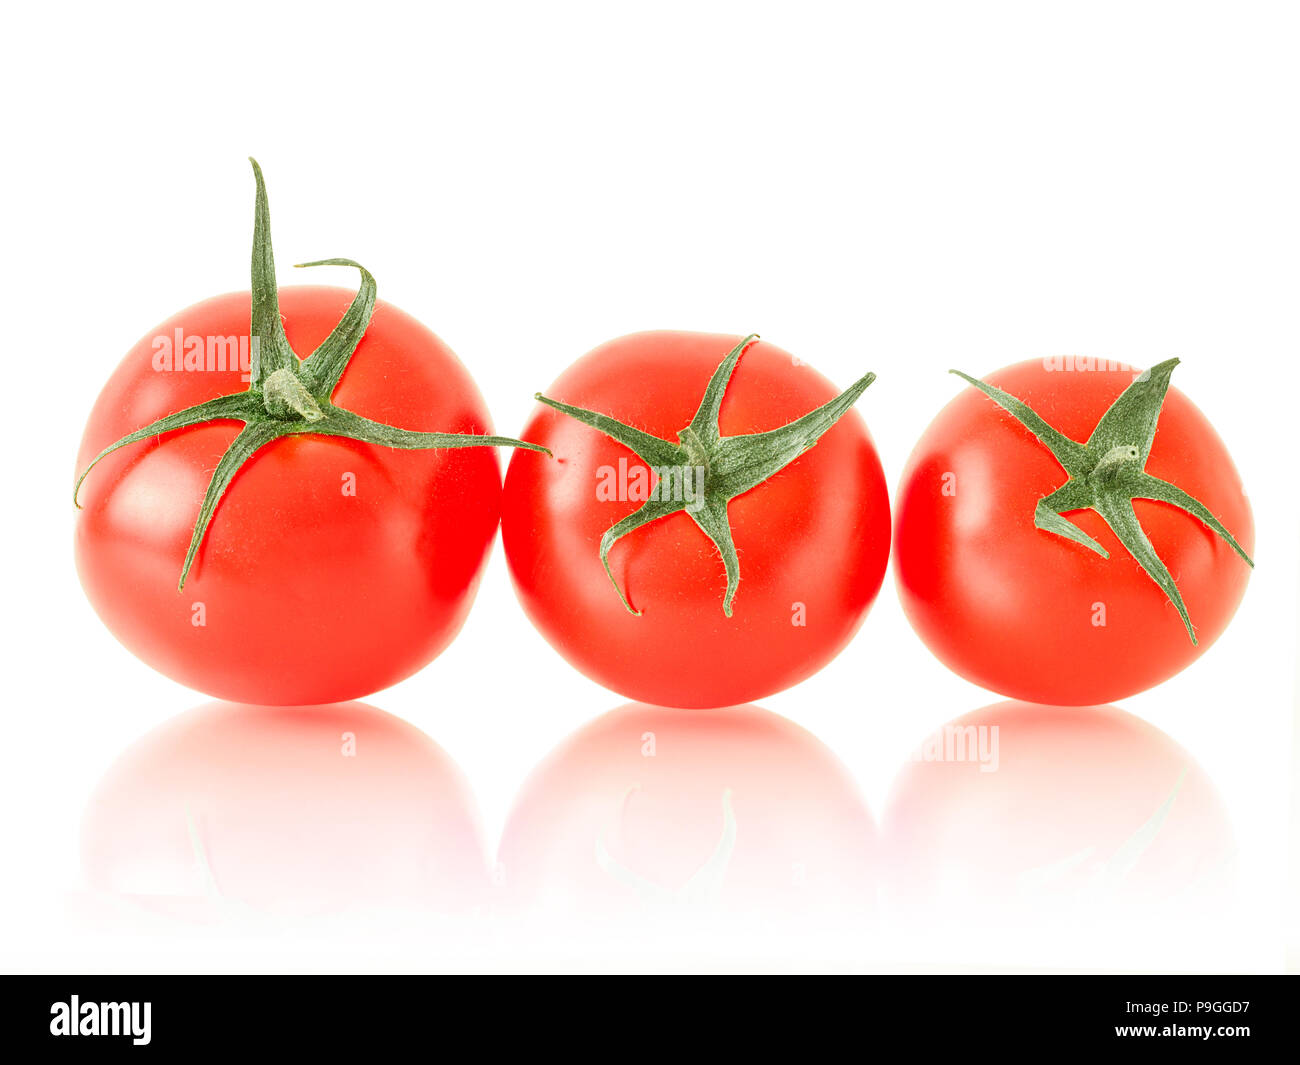 ripe tomato with green leaves Stock Photo